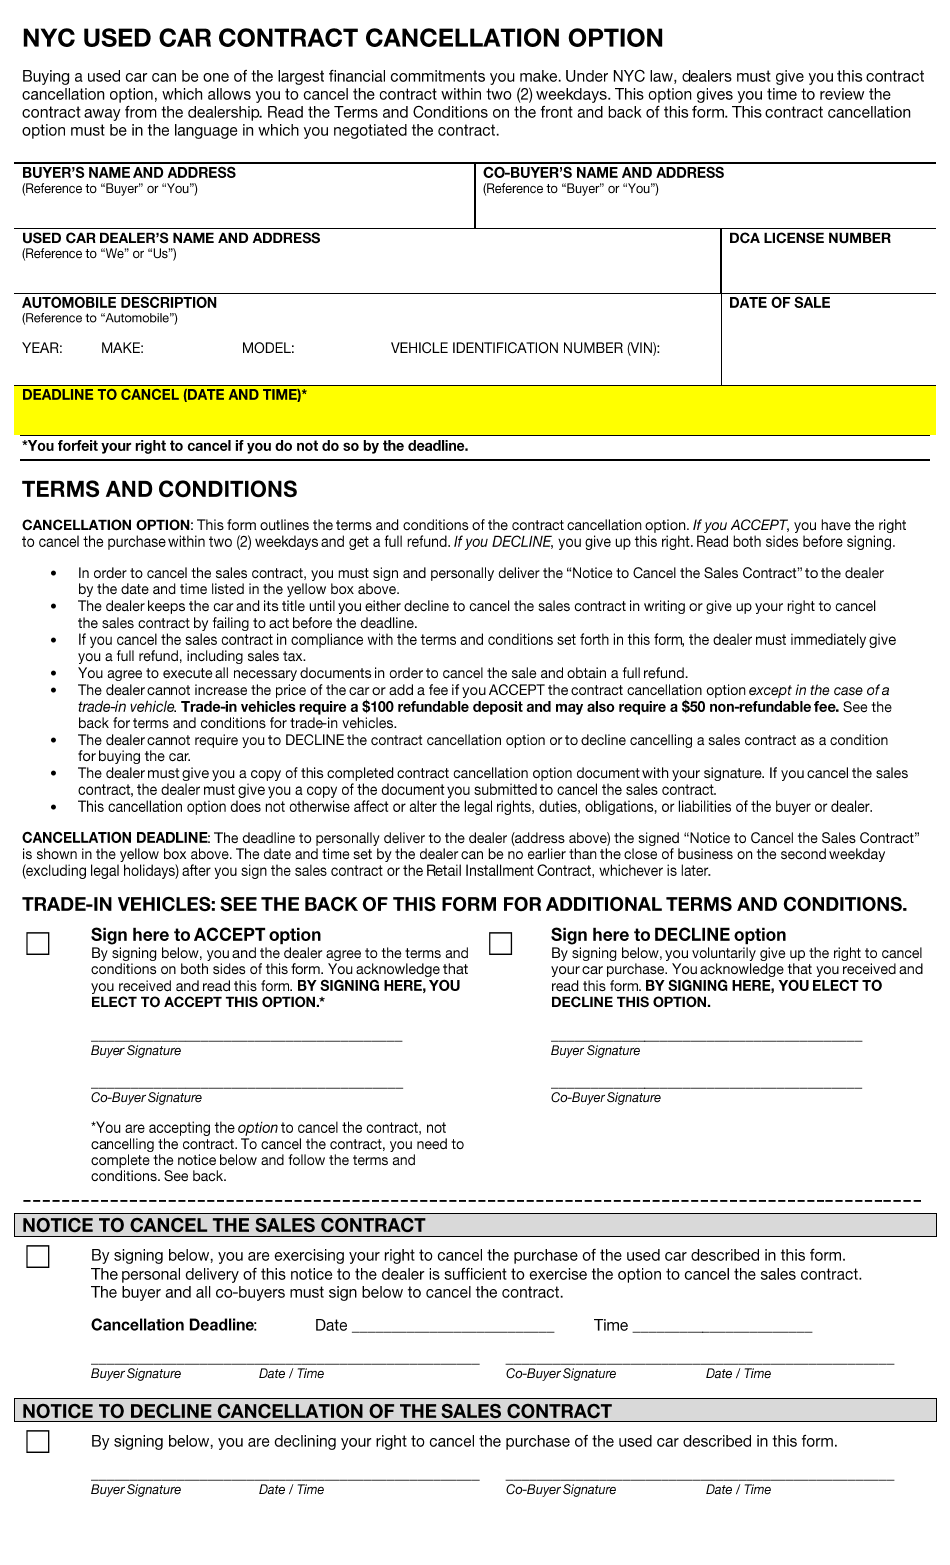 Nyc Used Car Contract Cancellation Option - New York City, Page 1